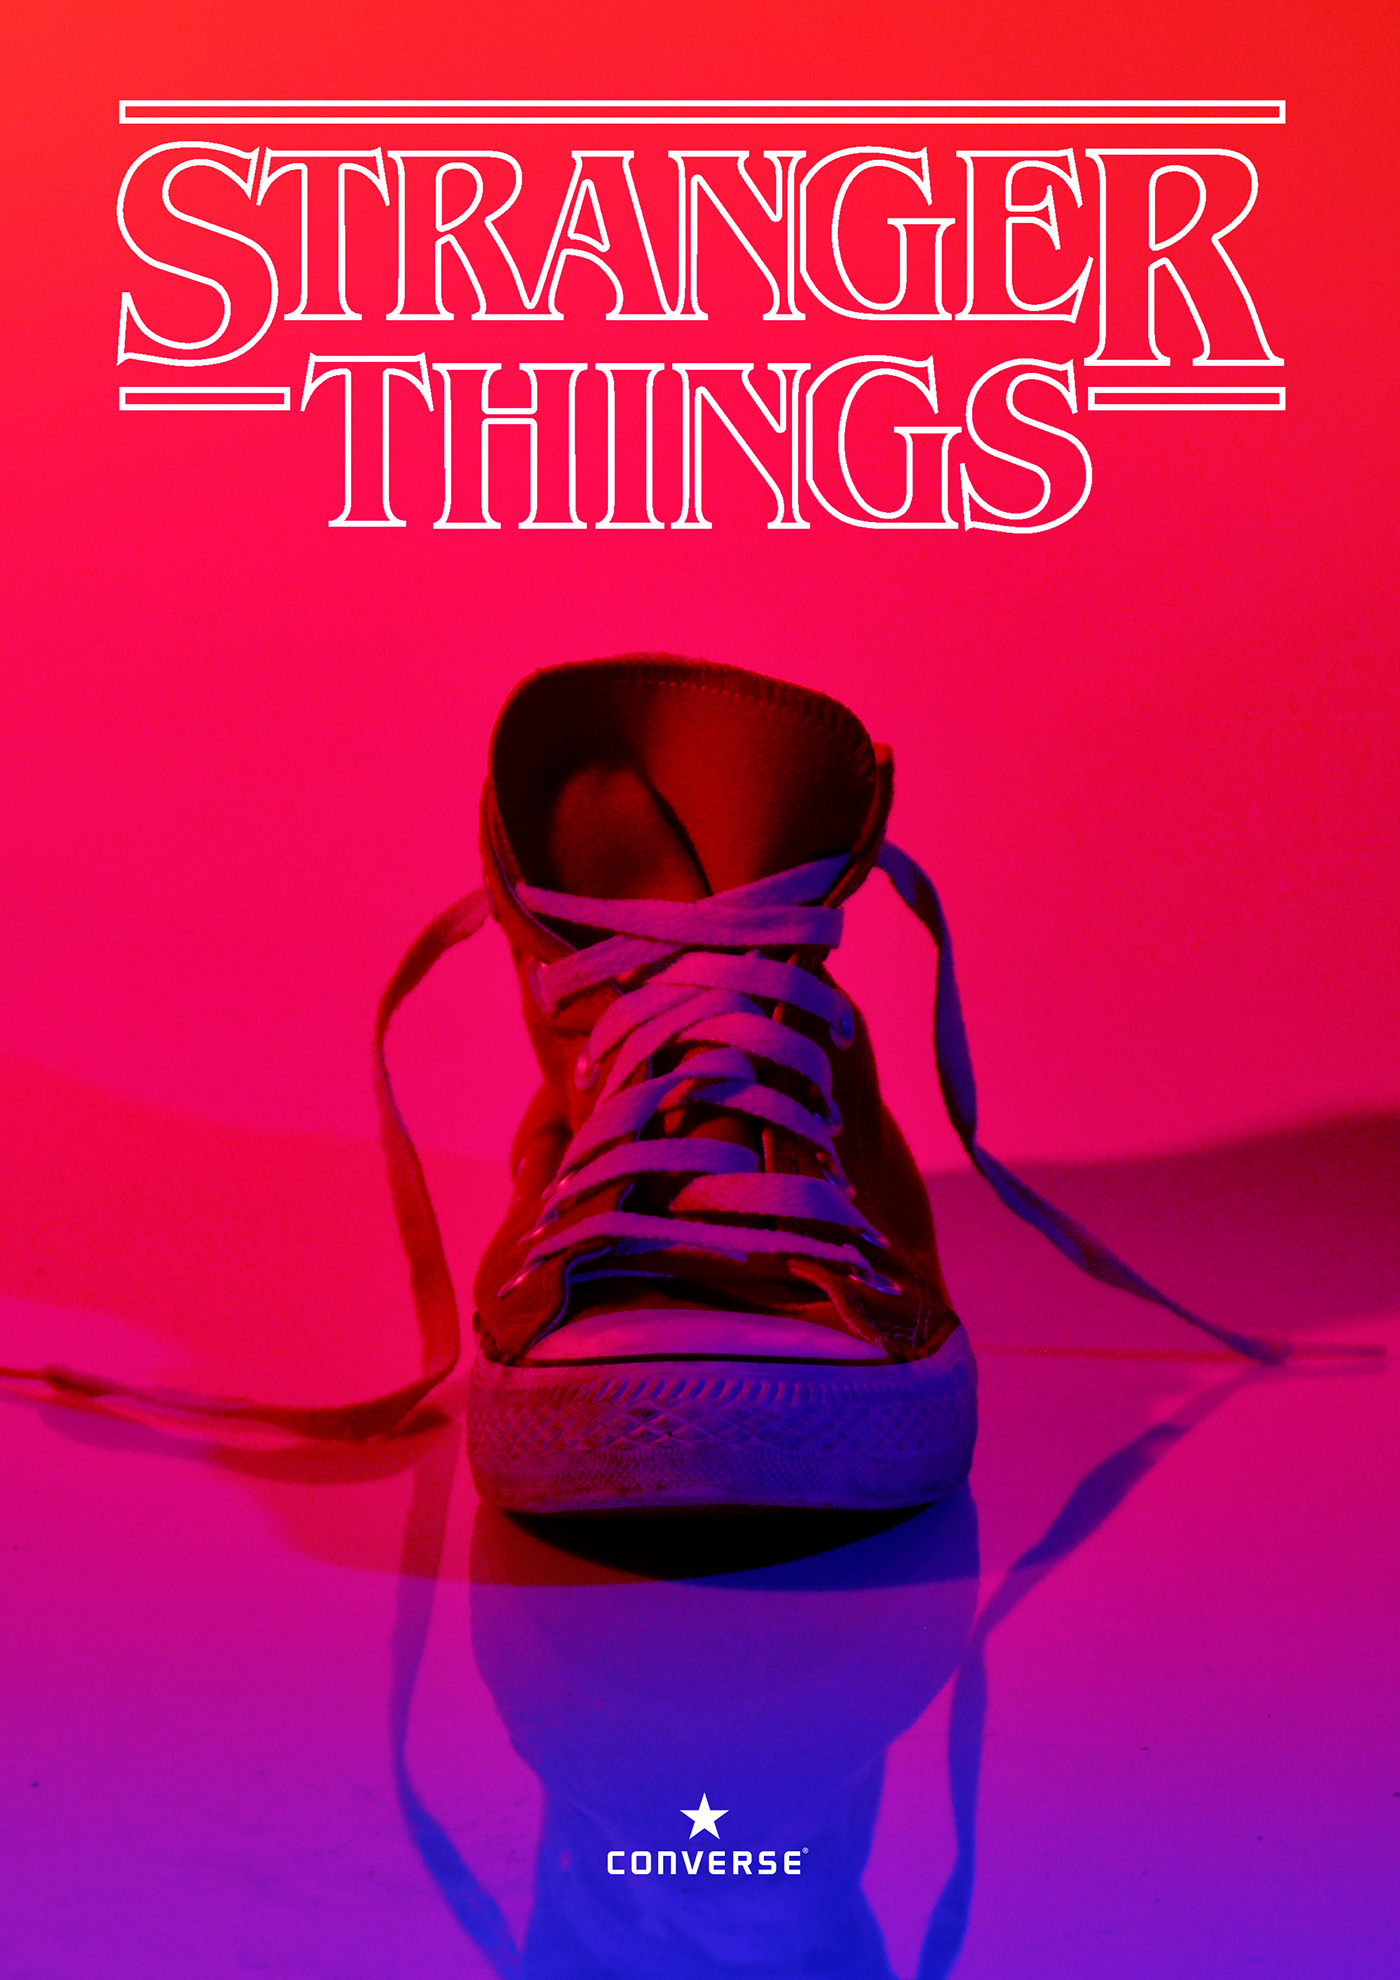 Photography  lights spiderman Rocky Stranger Things Cinema Glee poster converse all star